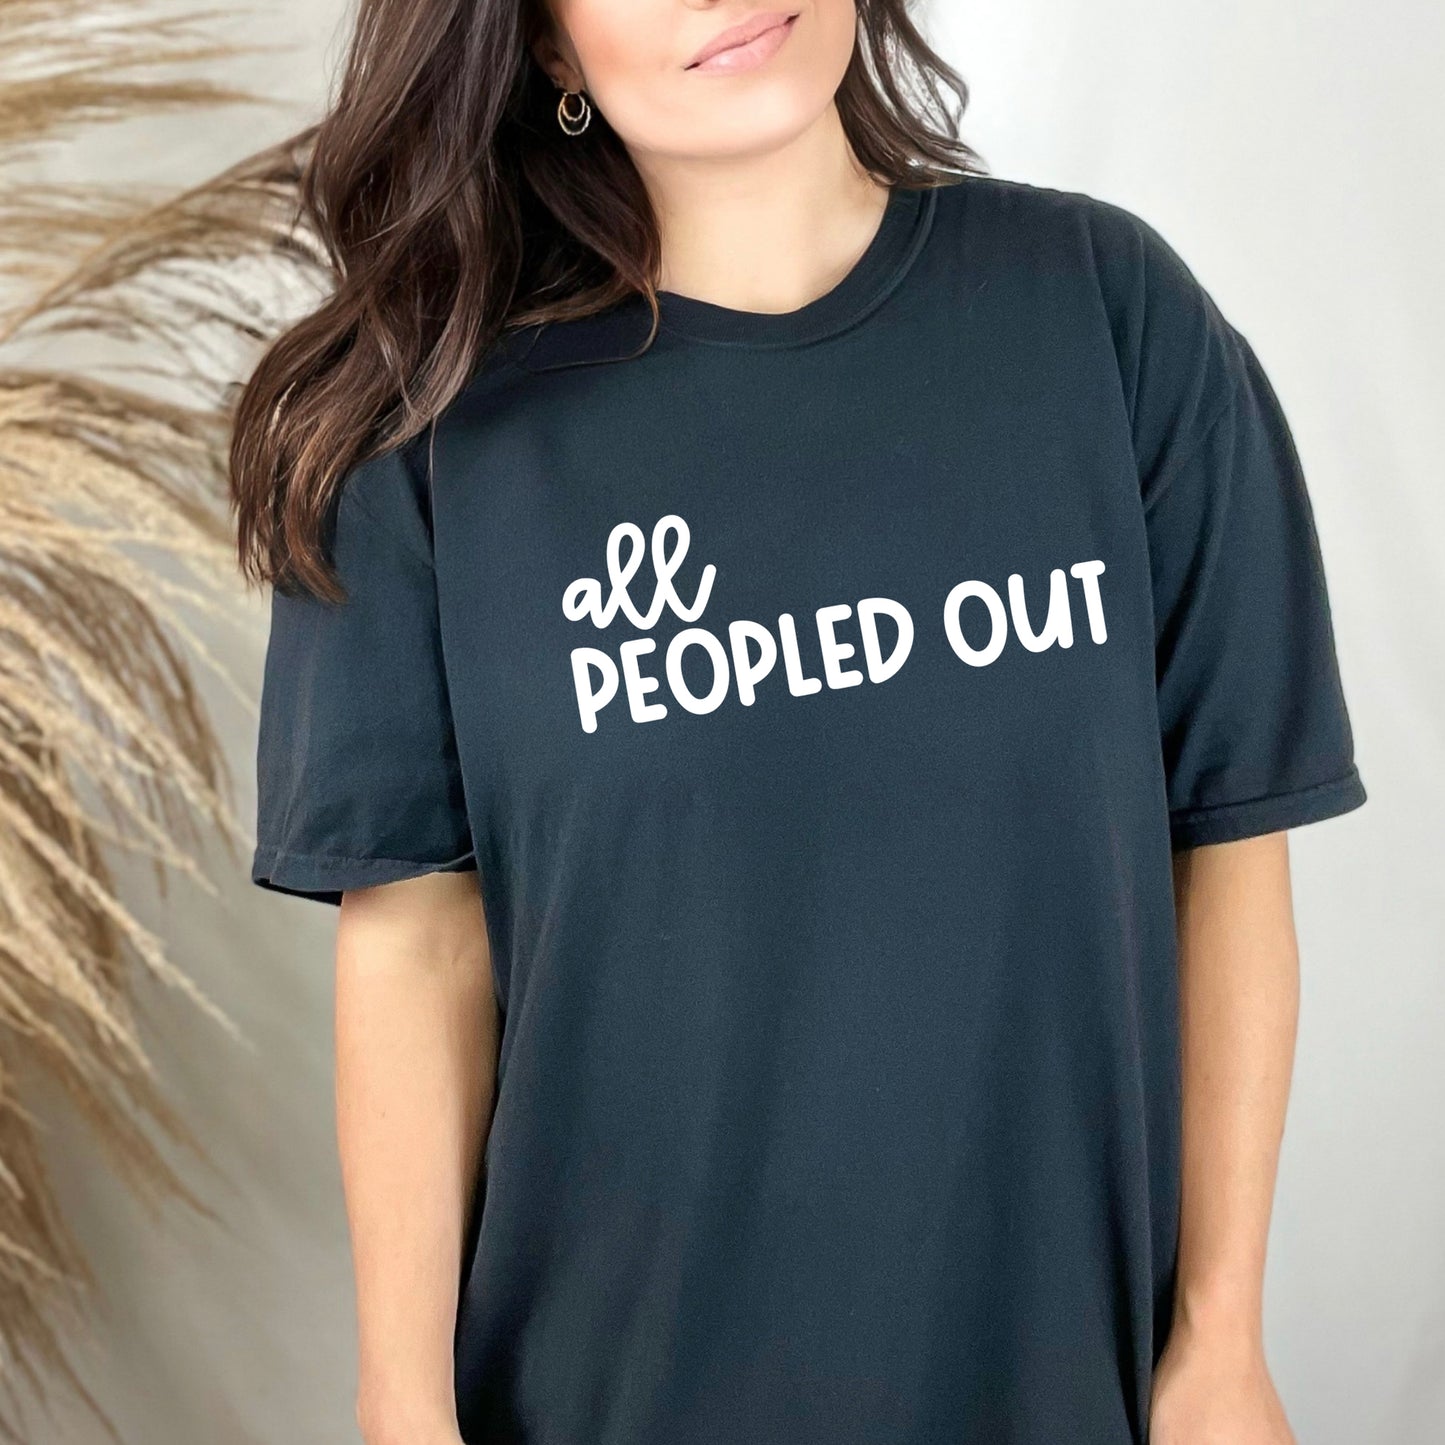 All peopled out screen print transfer